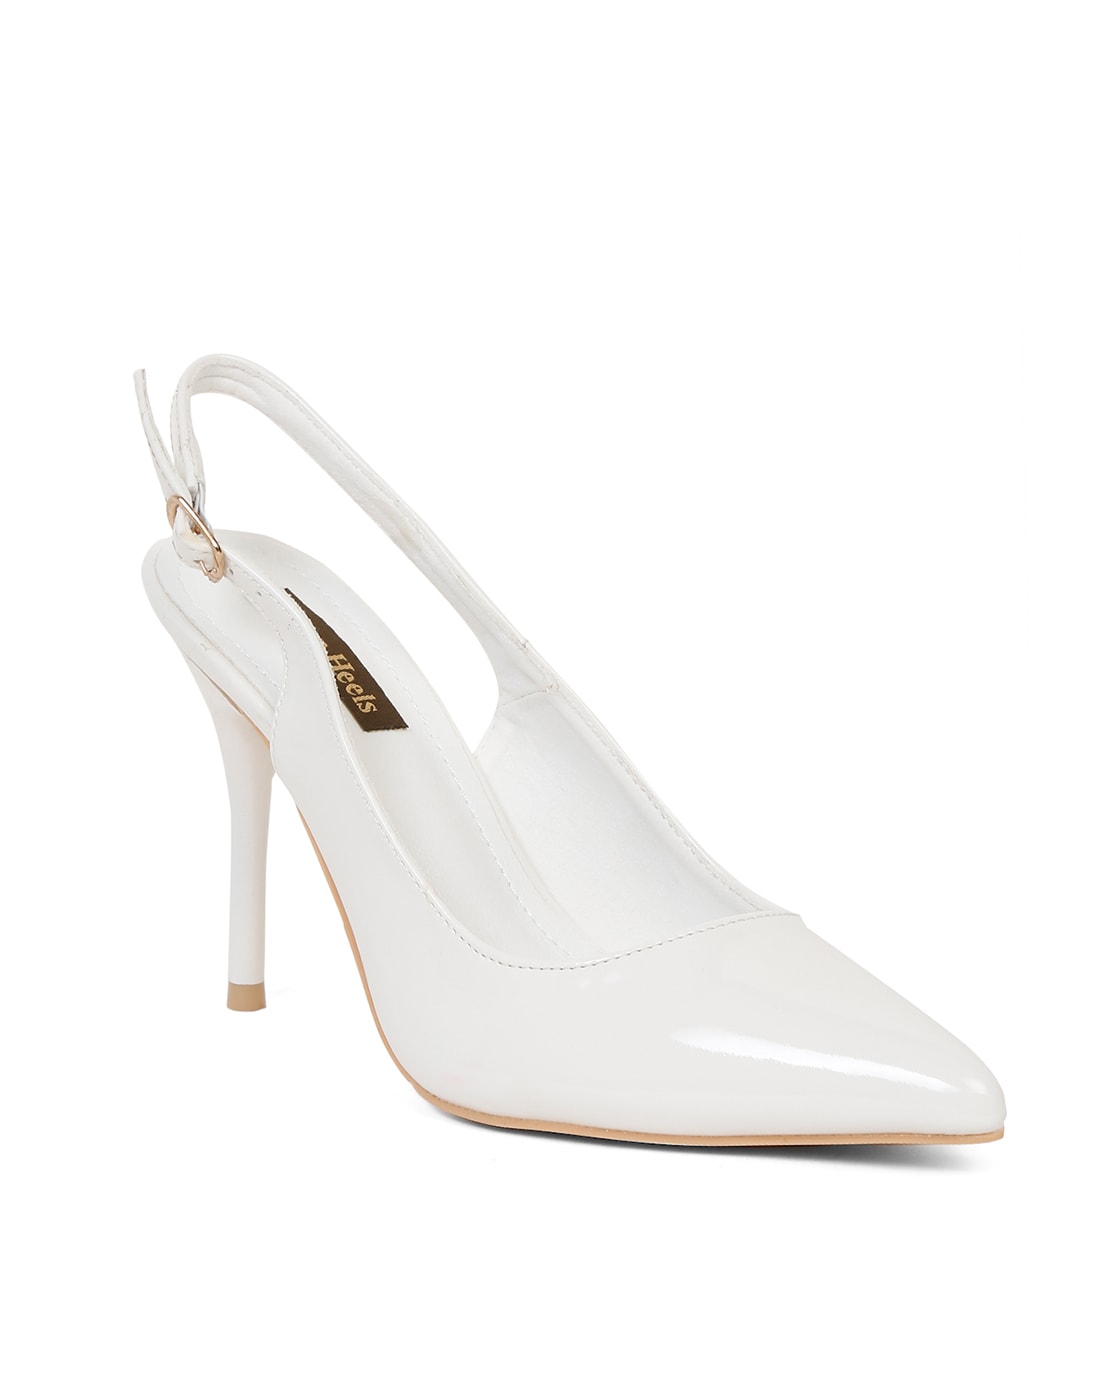 Lib Pointed Toe 5 inches Stiletto Heels Pastel Mat Classic Office Wedding  Pumps - Red in Sexy Heels & Platforms - $74.71